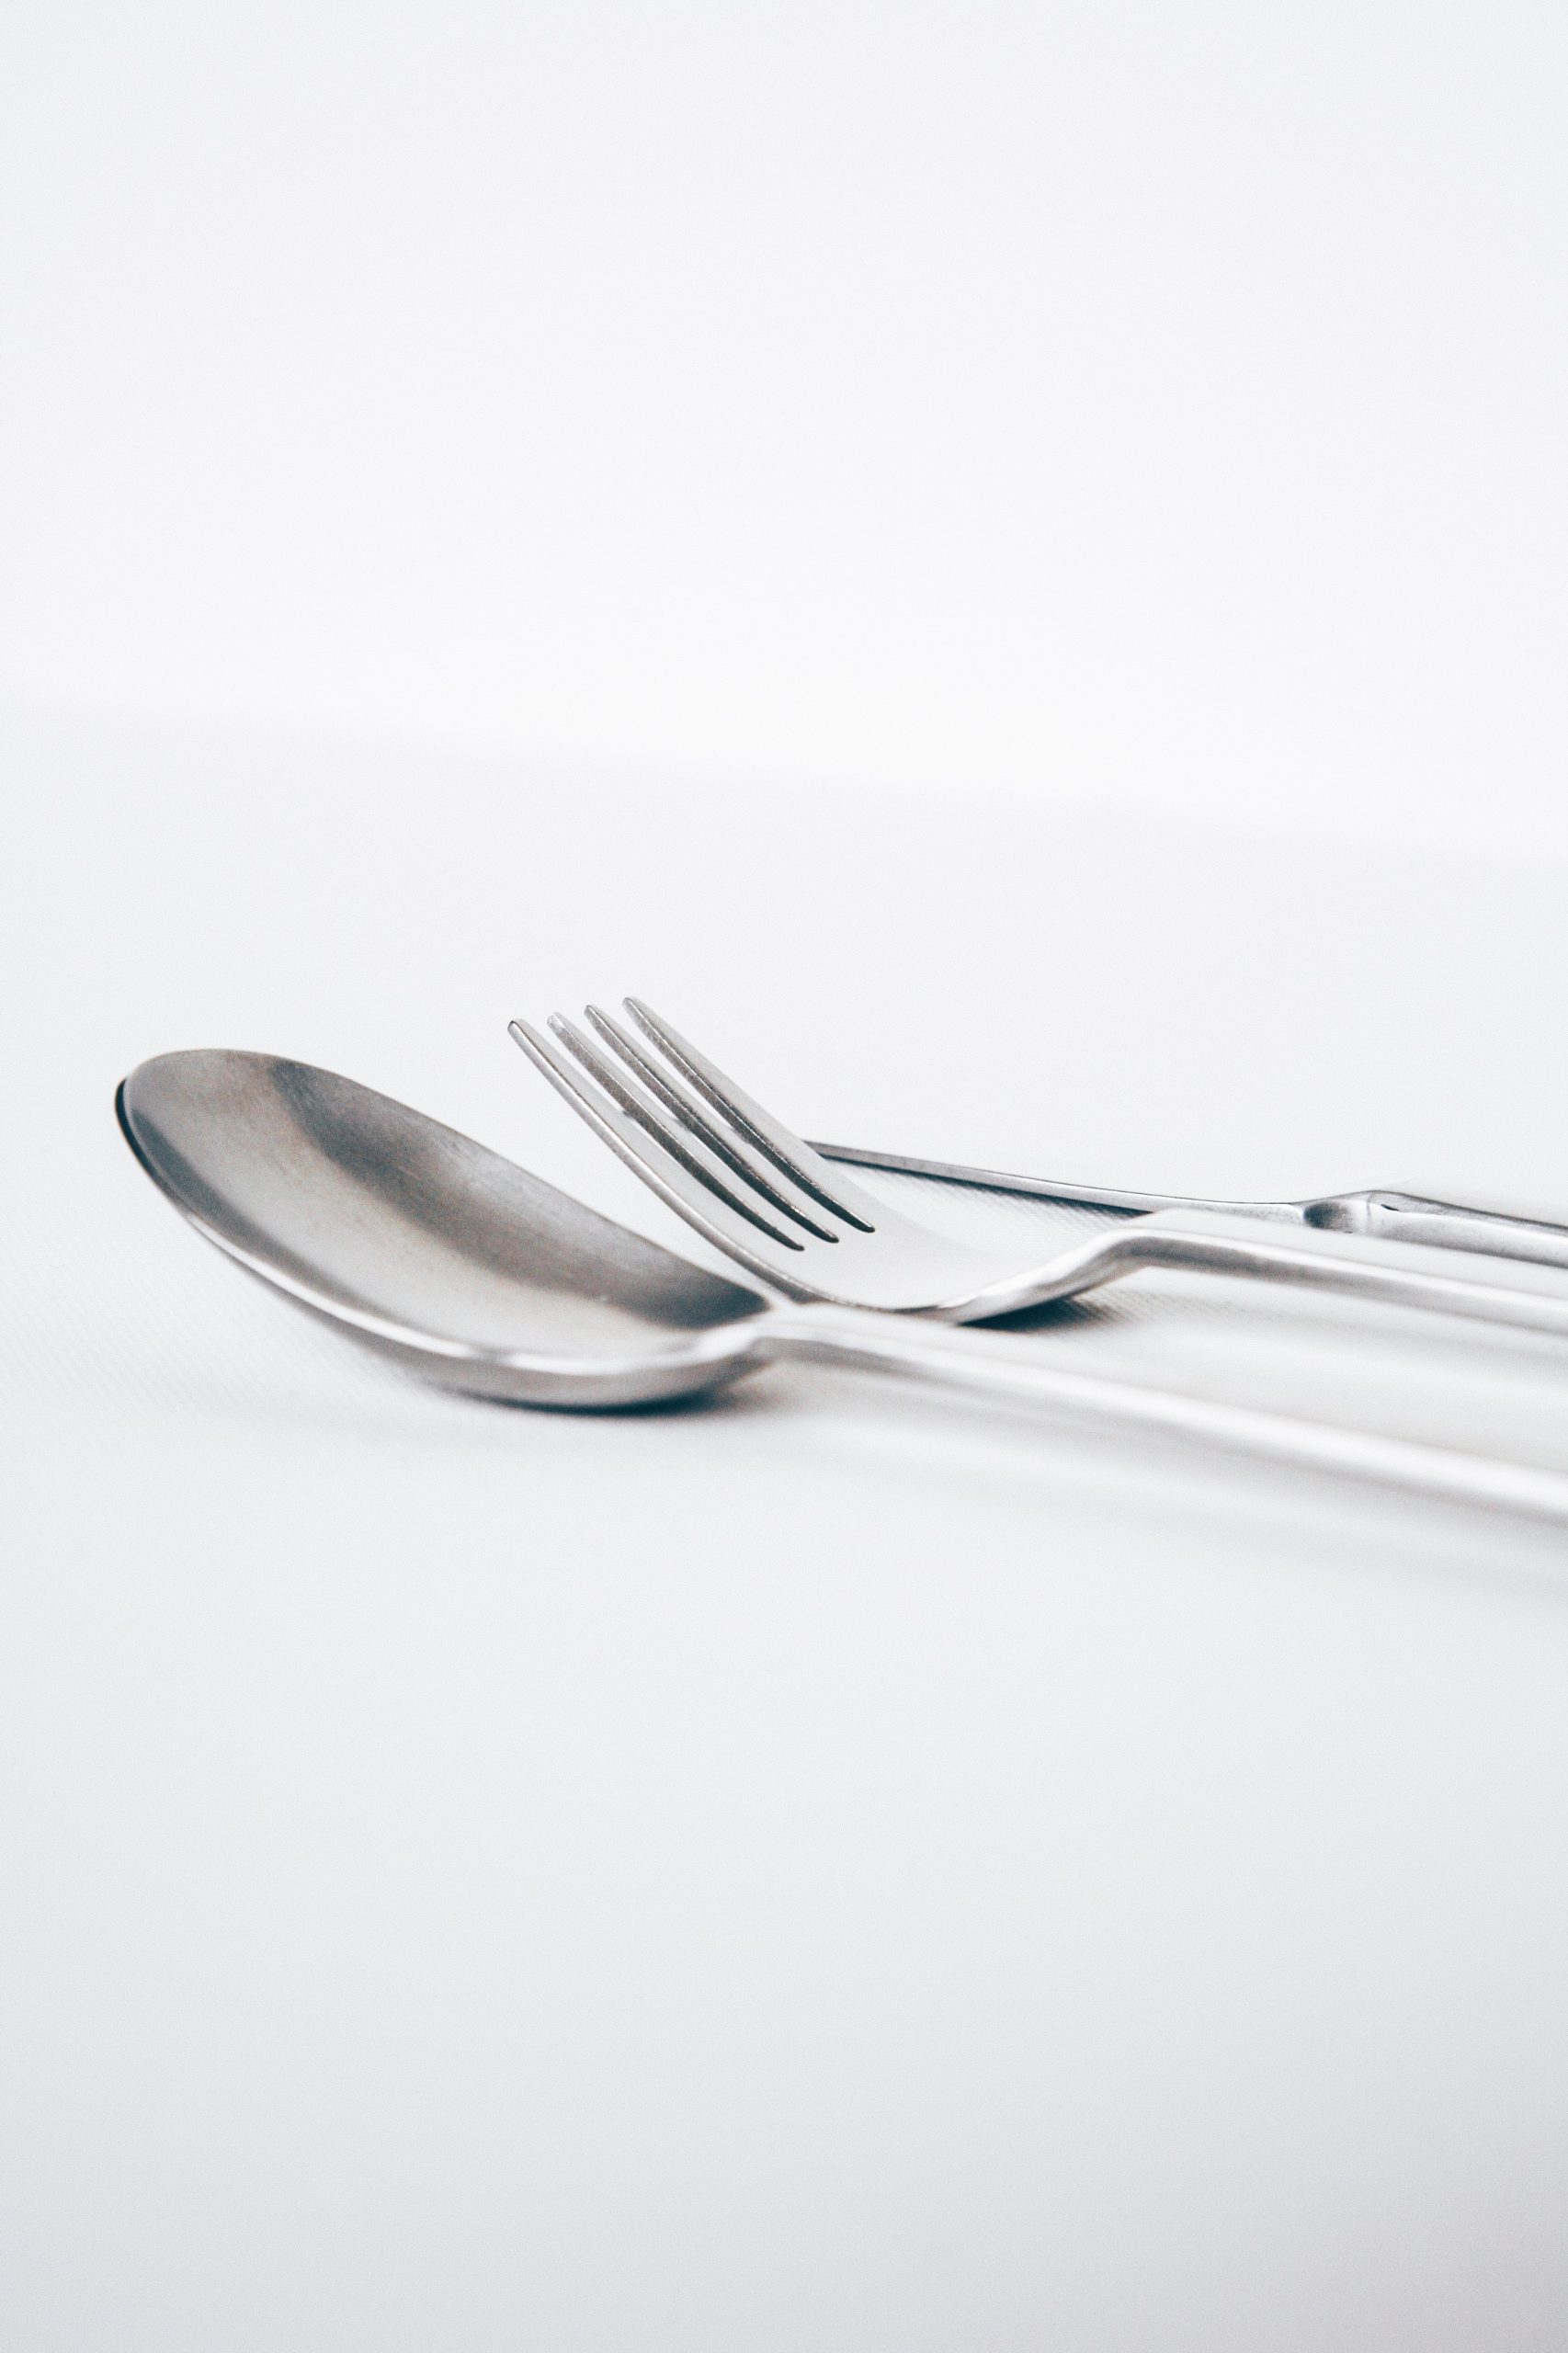 silver modern styled spoon, fork and knife